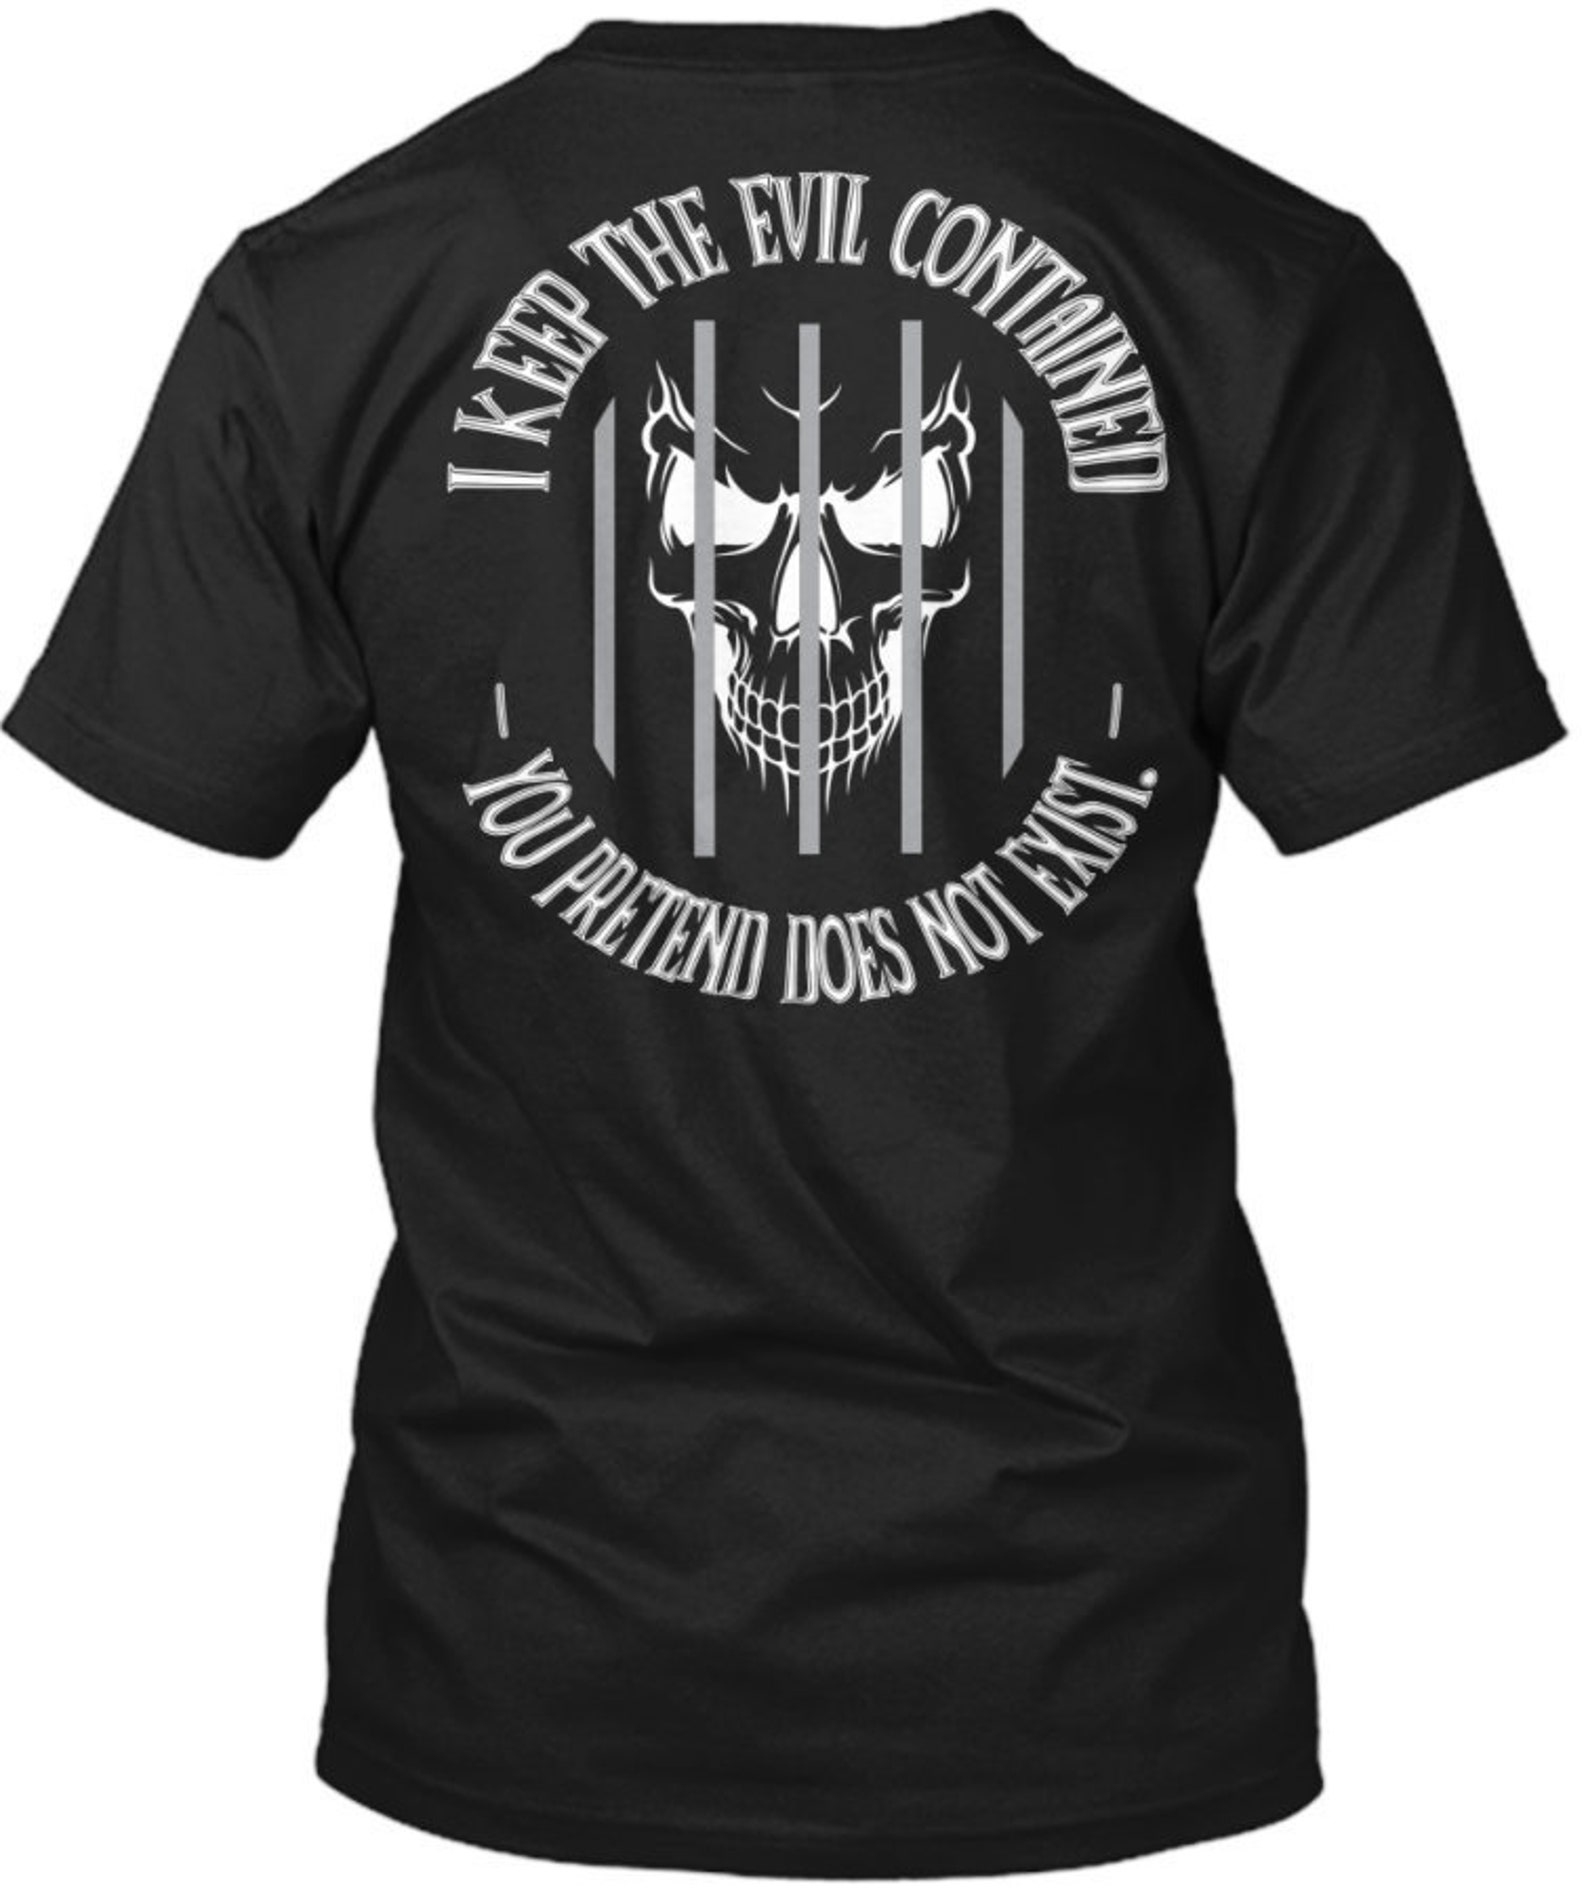 I Keep the Evil Contained You Pretend Does Not Exist - Etsy